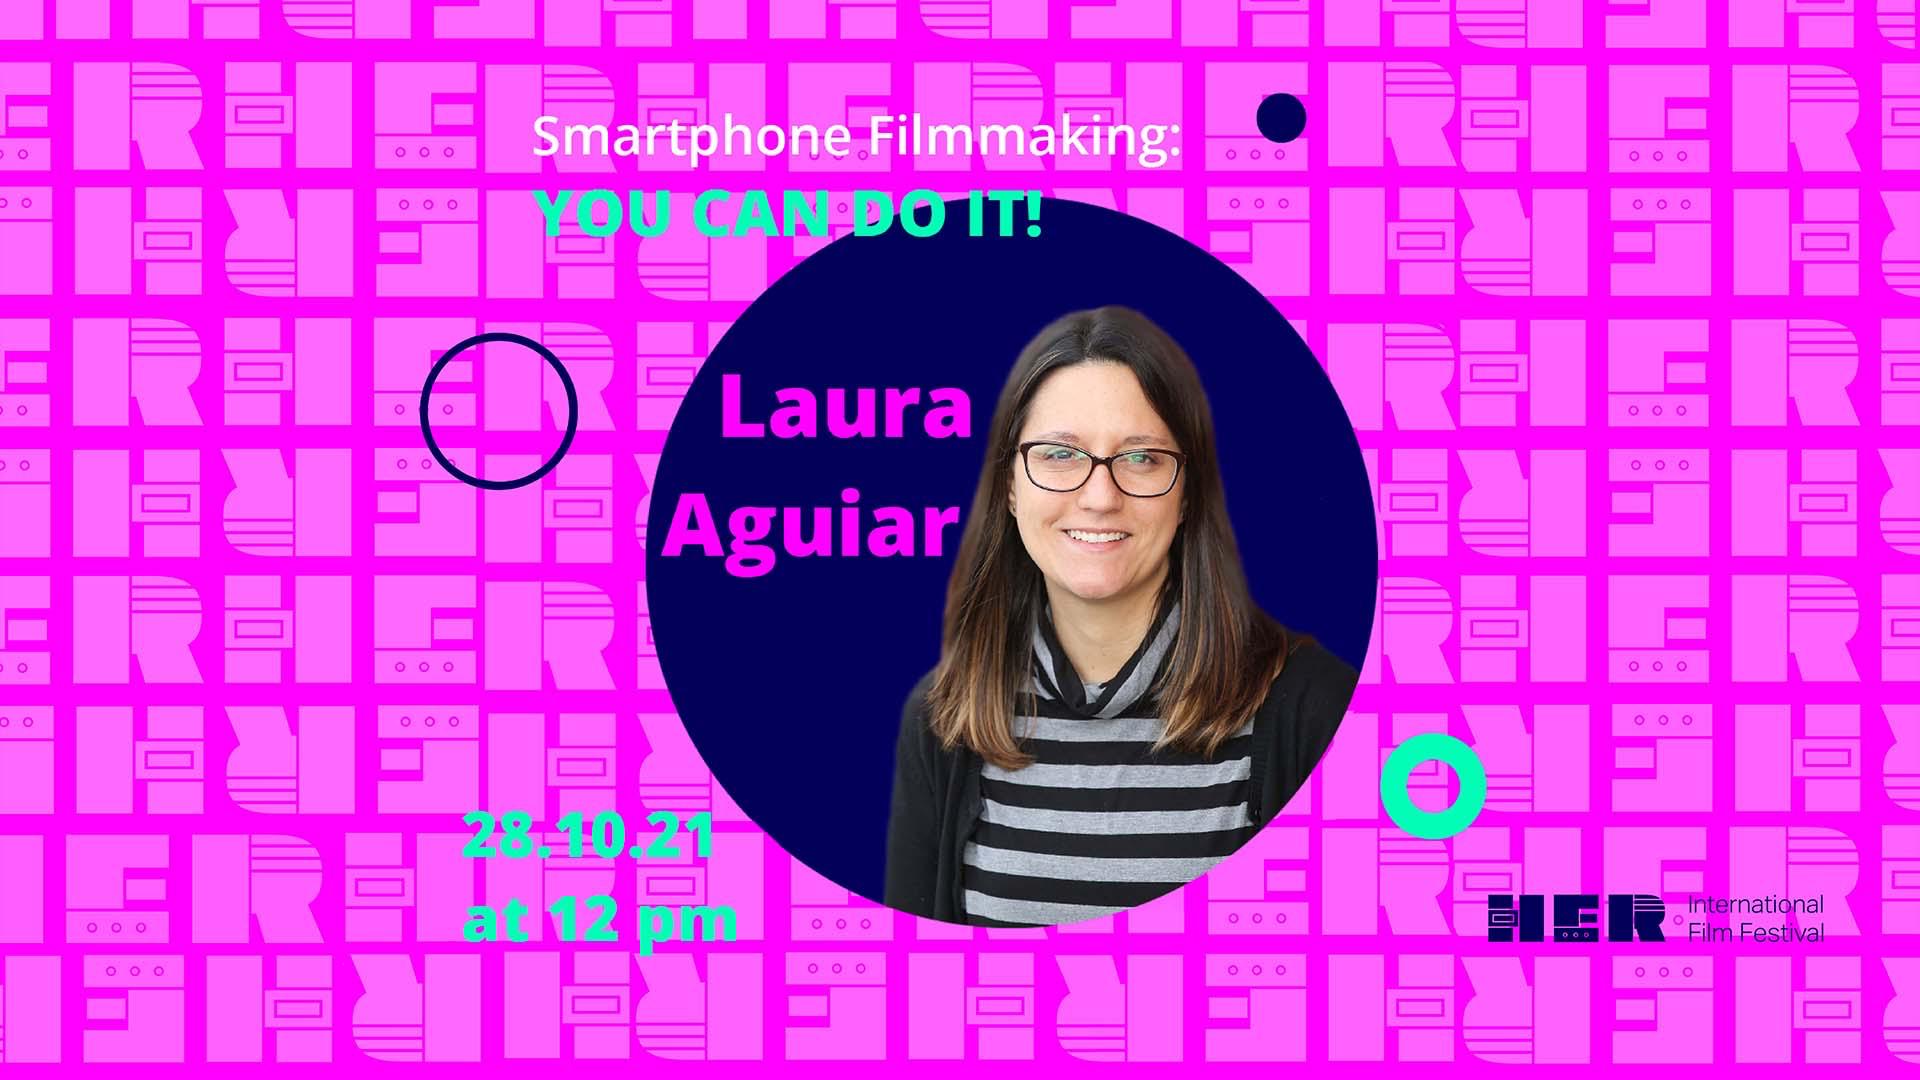 Smartphone Filmmaking: You Can Do It! With Laura Aguiar